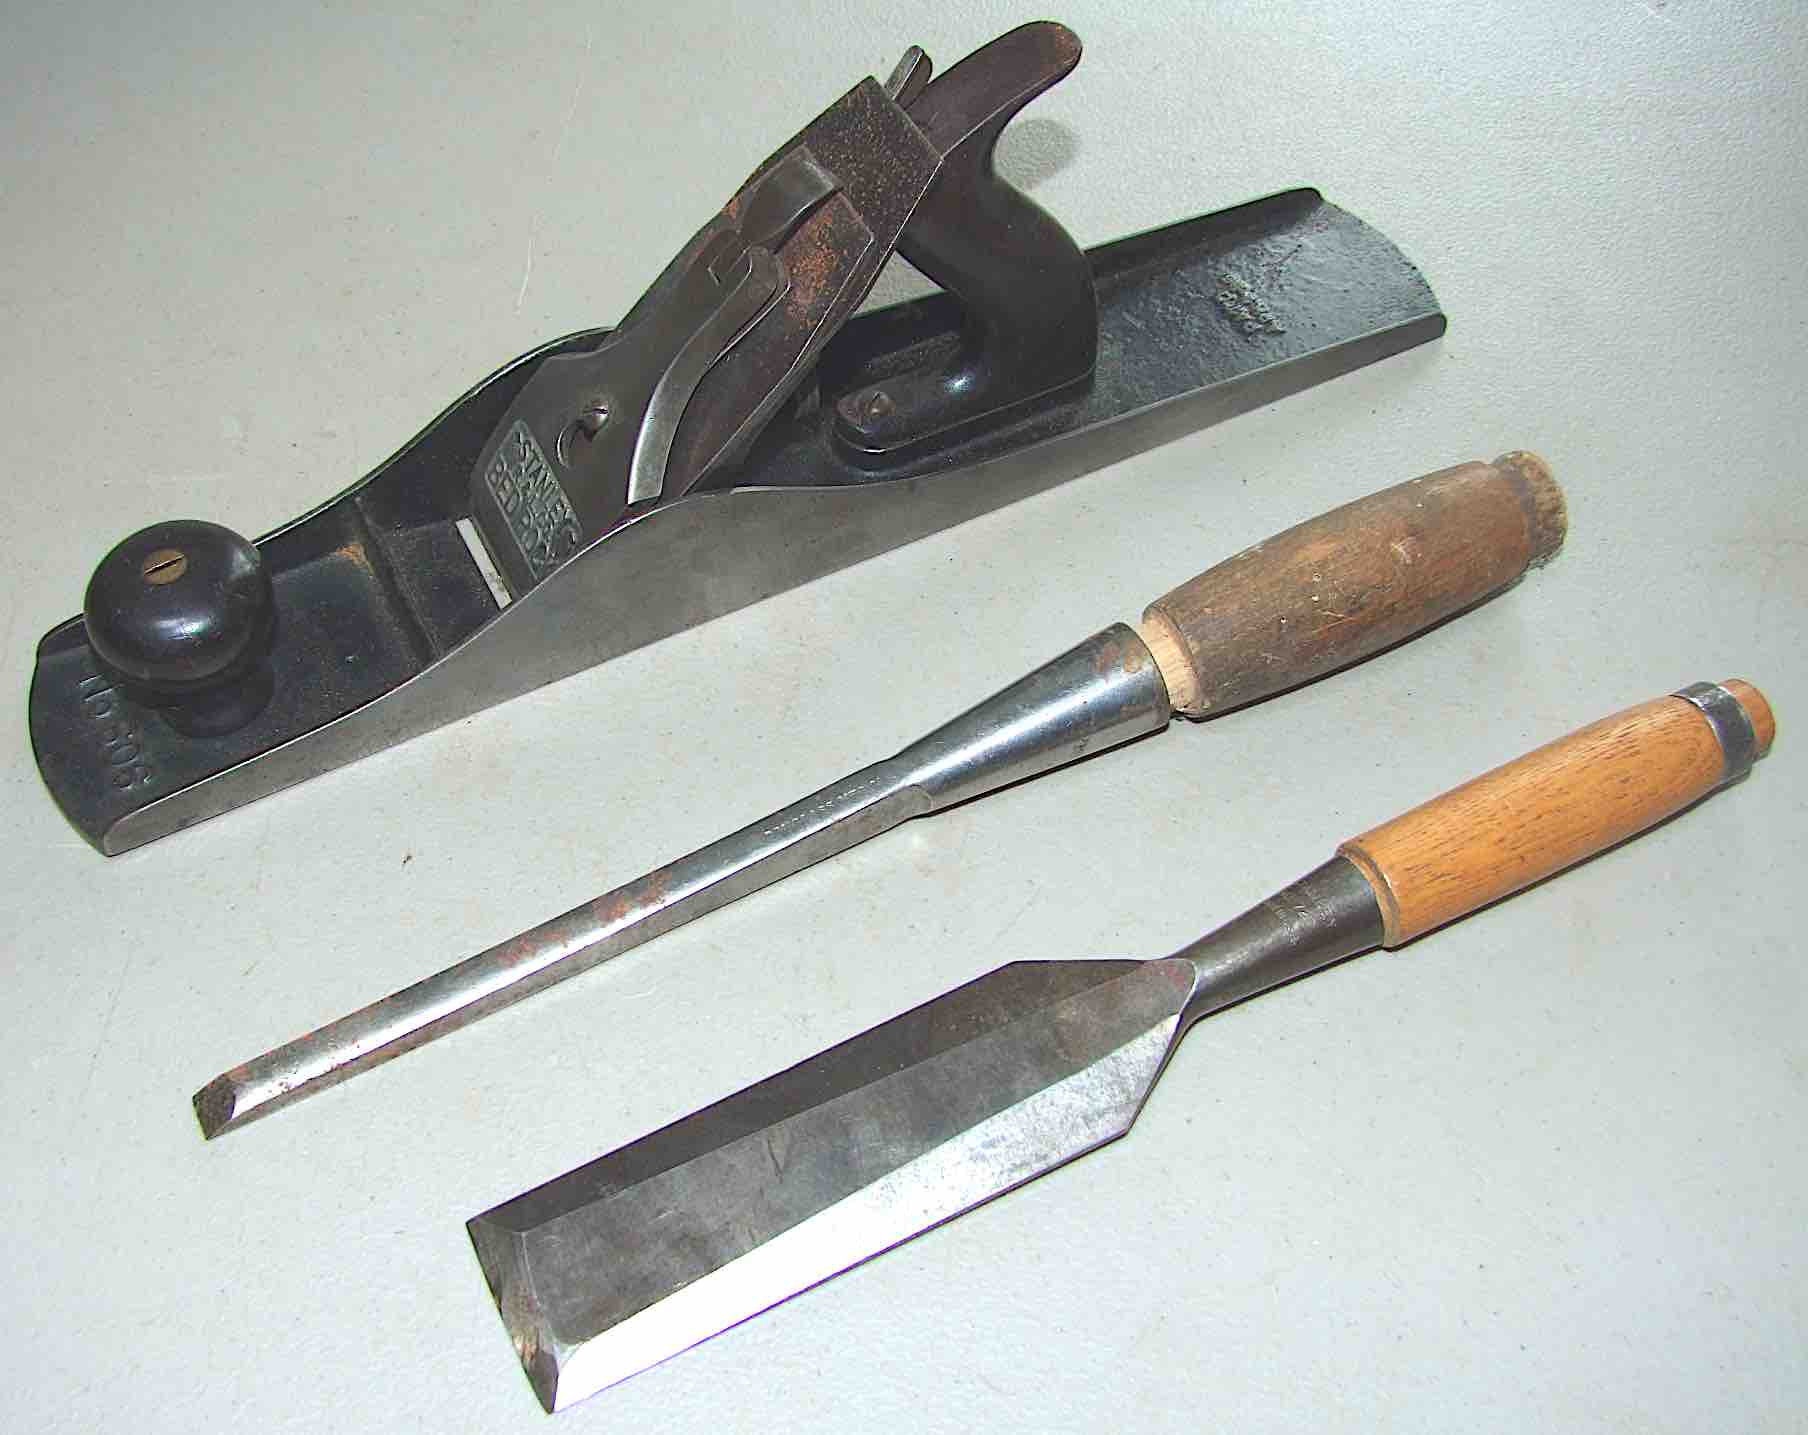 Sold at Auction: C.E. Jennings Chisel Set with Draw Knife